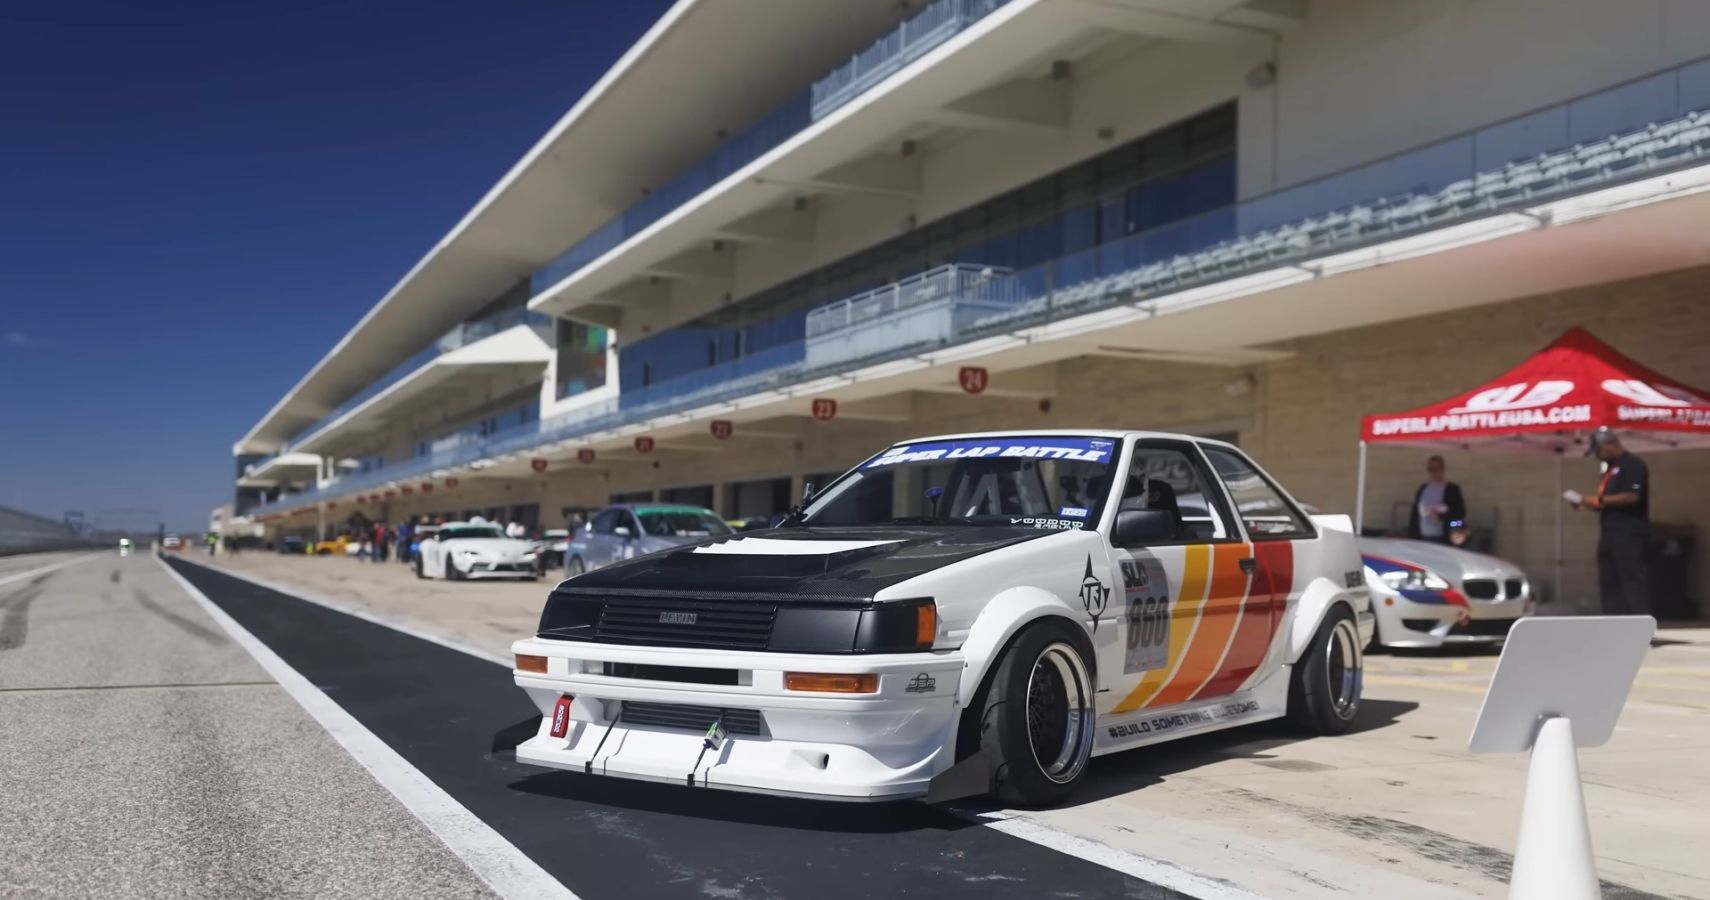 White Honda F22 Swapped Toyota AE86 With HKS Supercharger